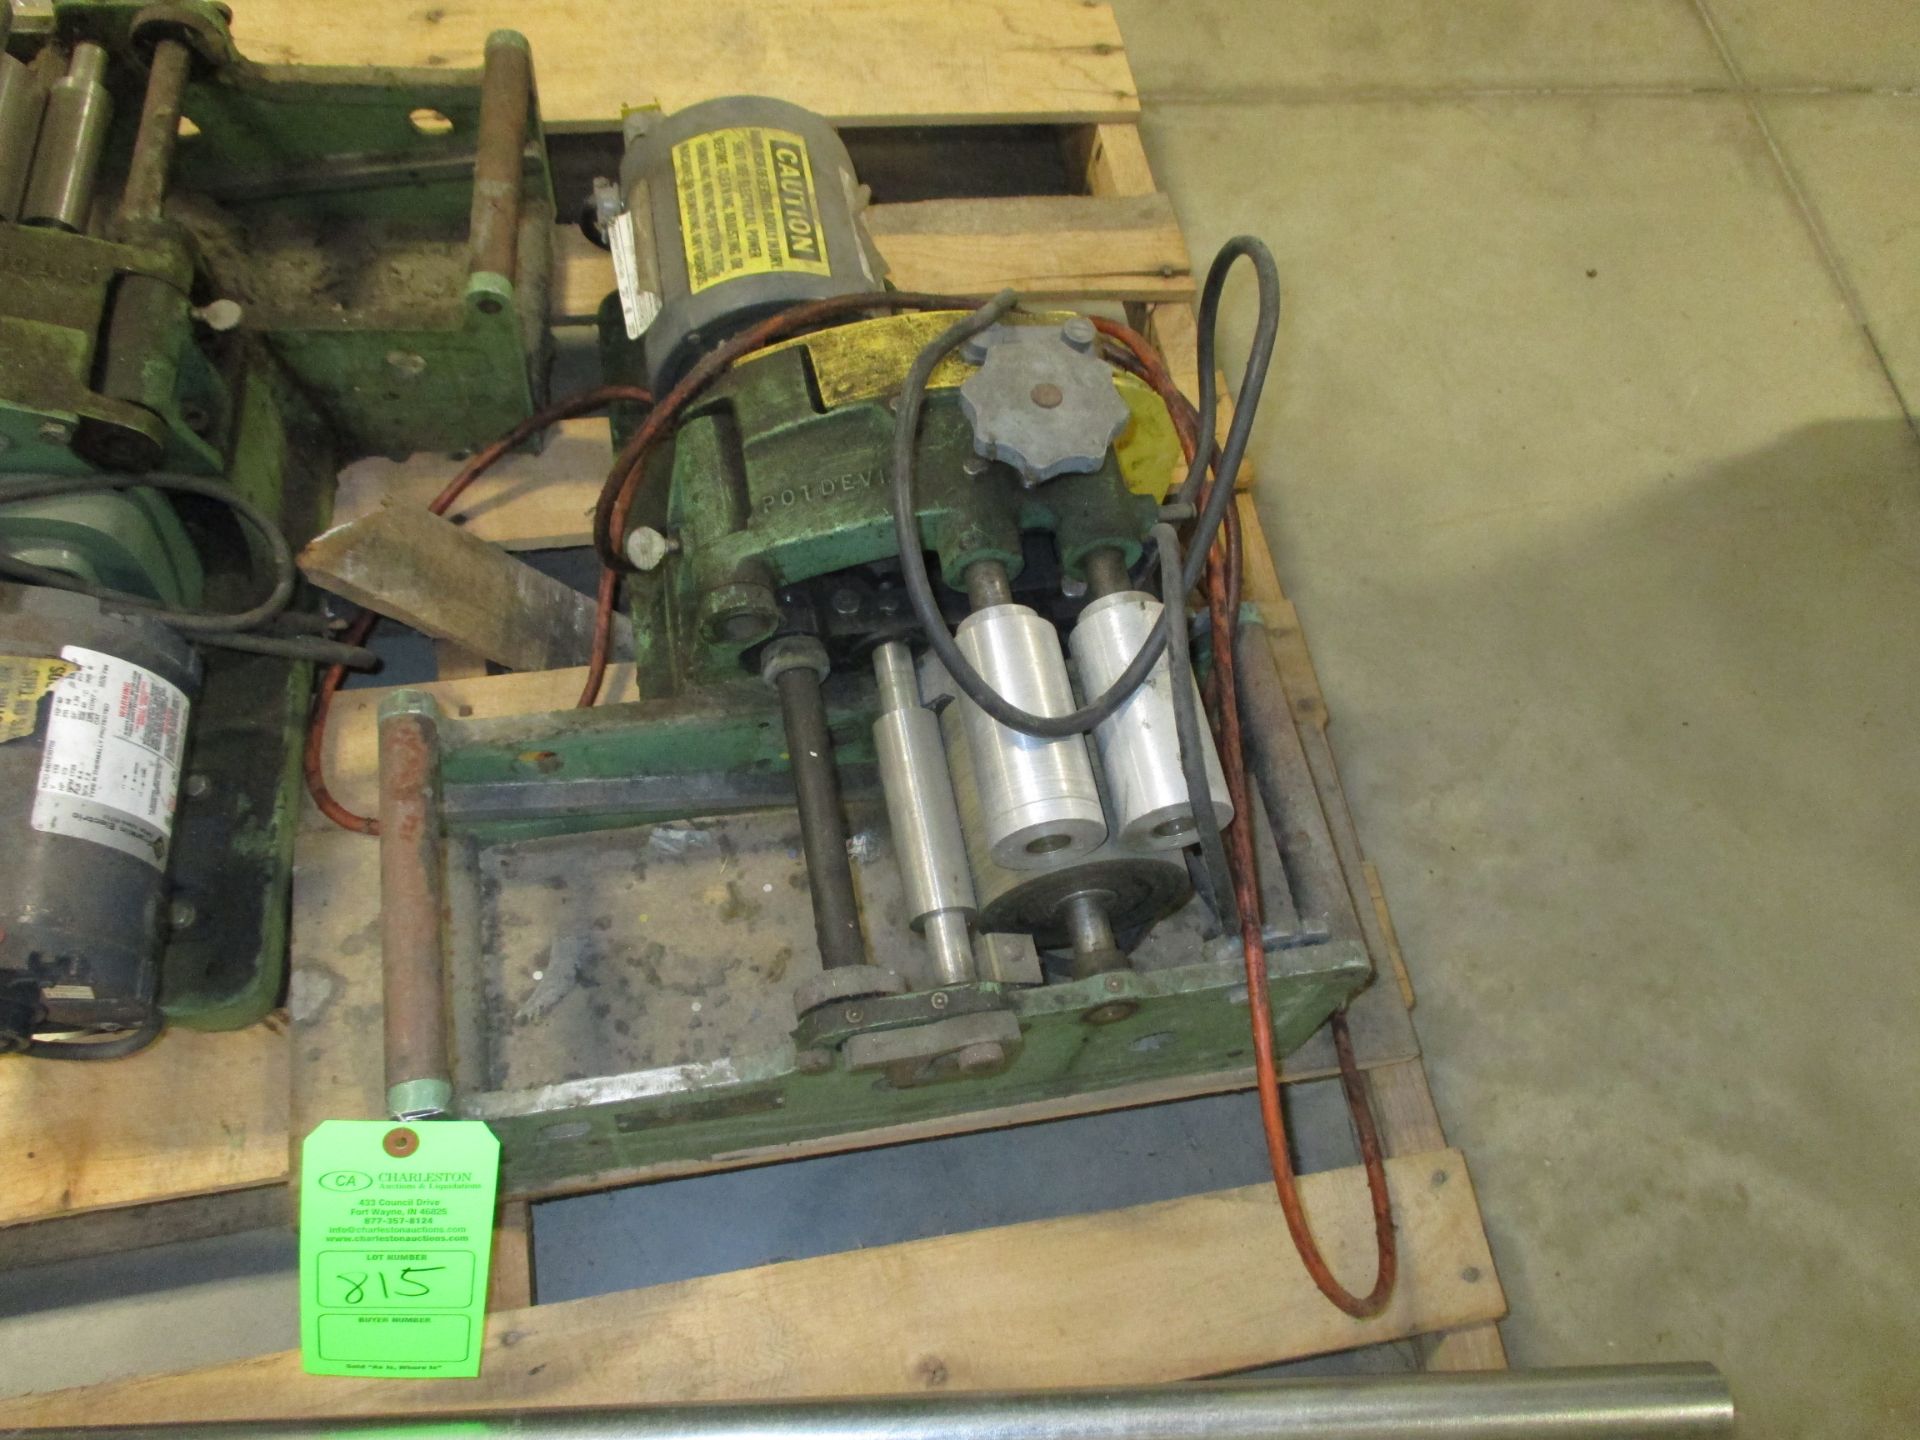 POT DERIN ADHESIVE MACHINE W/ 1/3 HP MOTORS(5373 STATE ROUTE 29 CELINA OH 45822-9210)